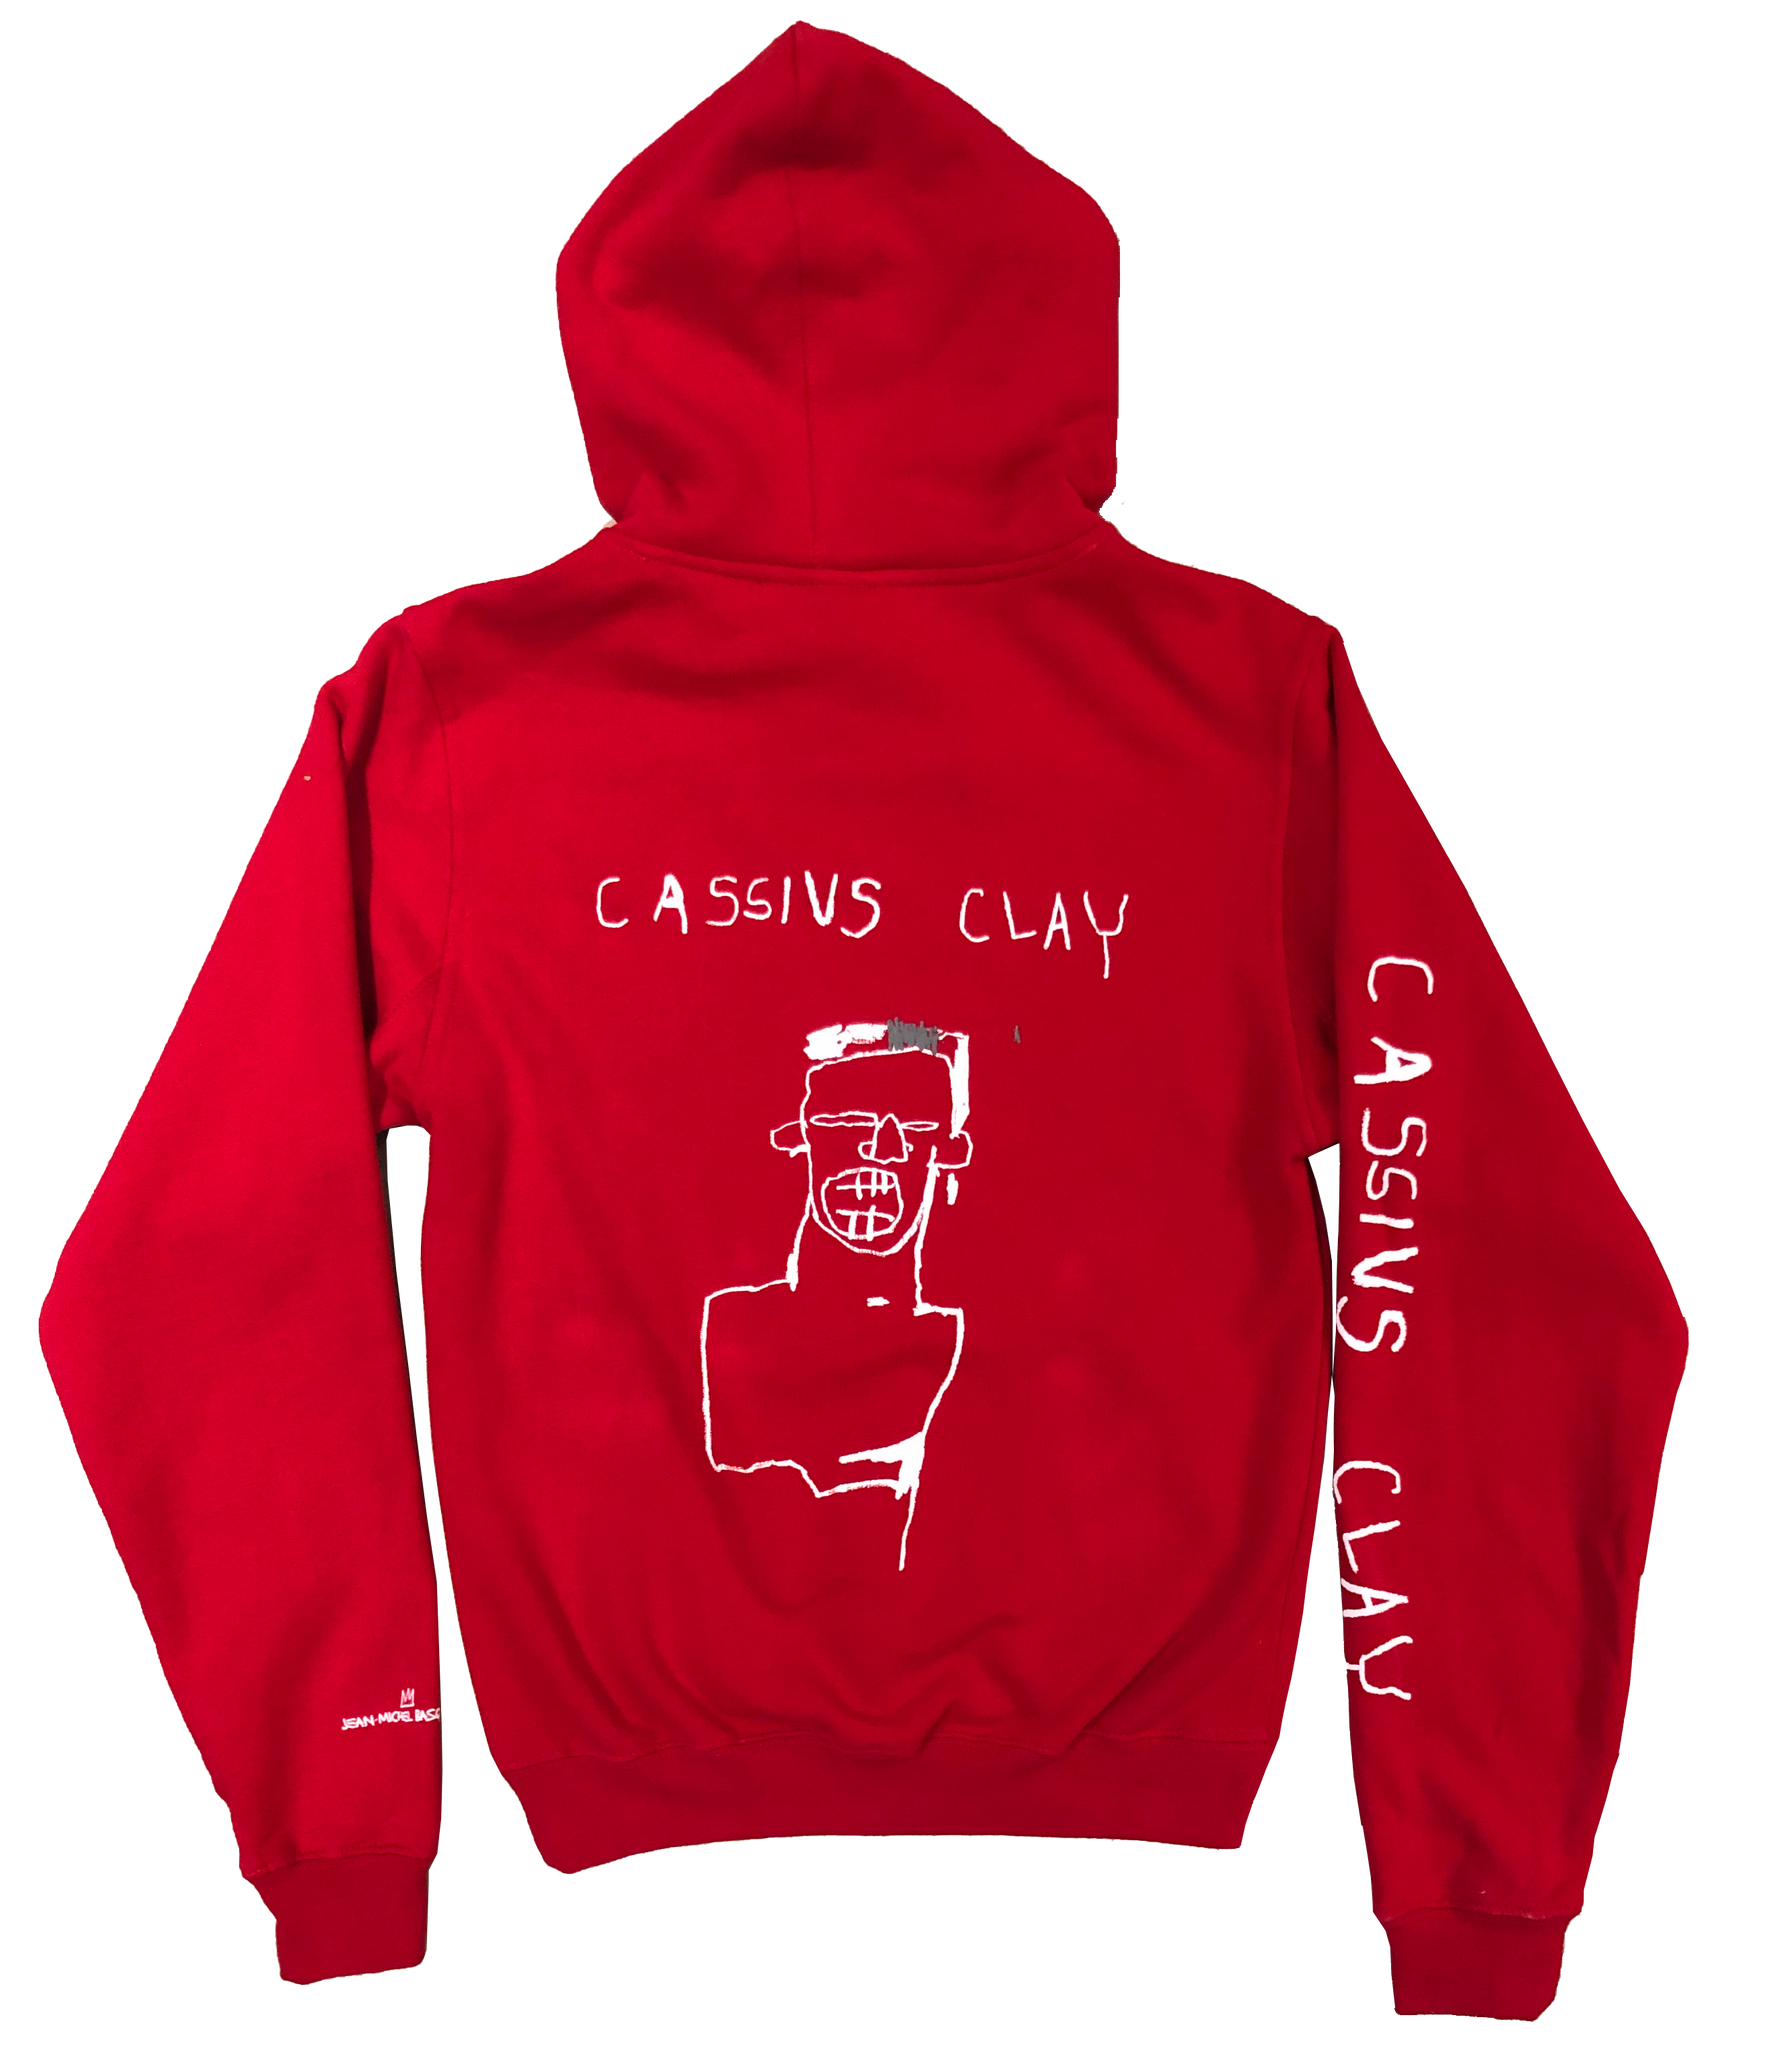 Jean-Michel Basquiat "Cassius Clay" Unisex Hoodie (Red) - The Brant Foundation Shop